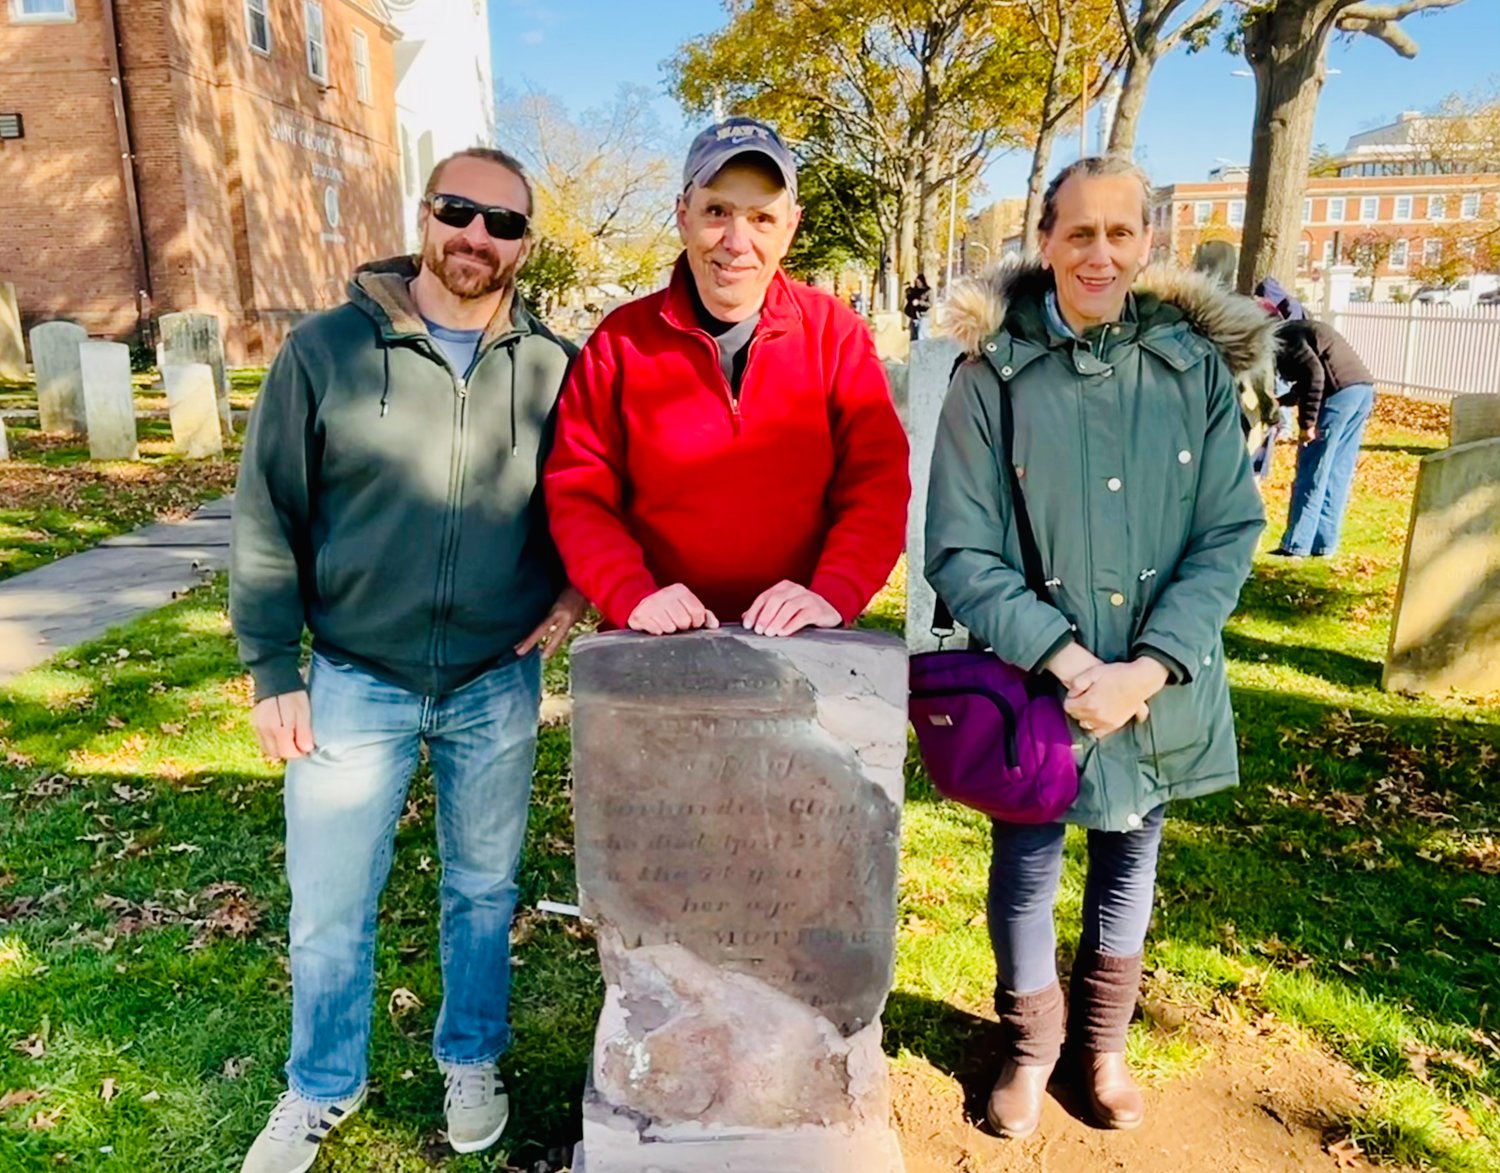 Daniel Baxt, Clowes descendant Bruce Williams, and St. George’s warden Reine Bethany discussed an 1833 Clowes gravestone that Williams is restoring in St. George’s churchyard.